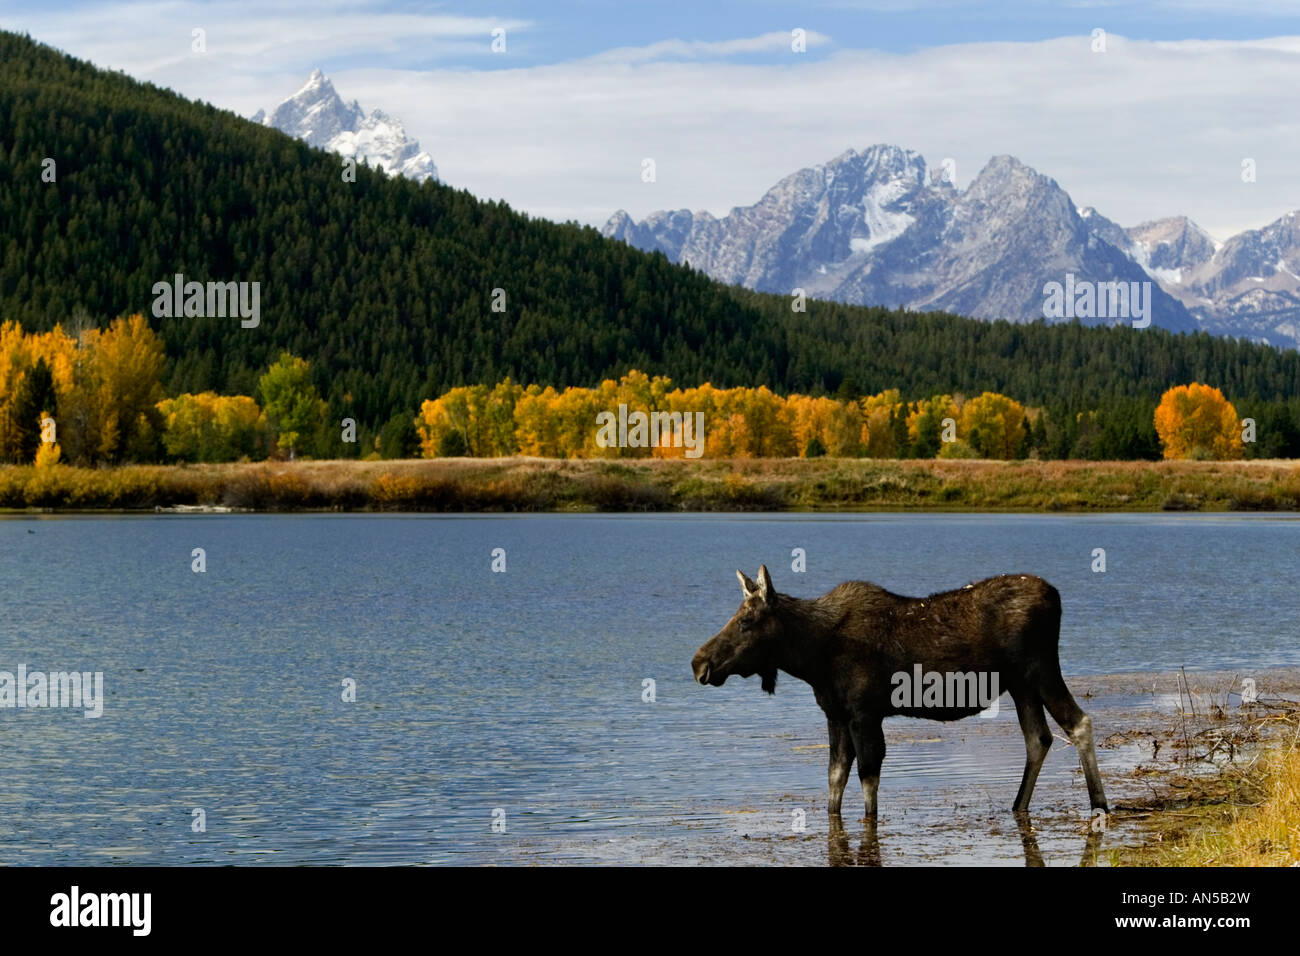 Baby moose claf at oxbow bend Stock Photo